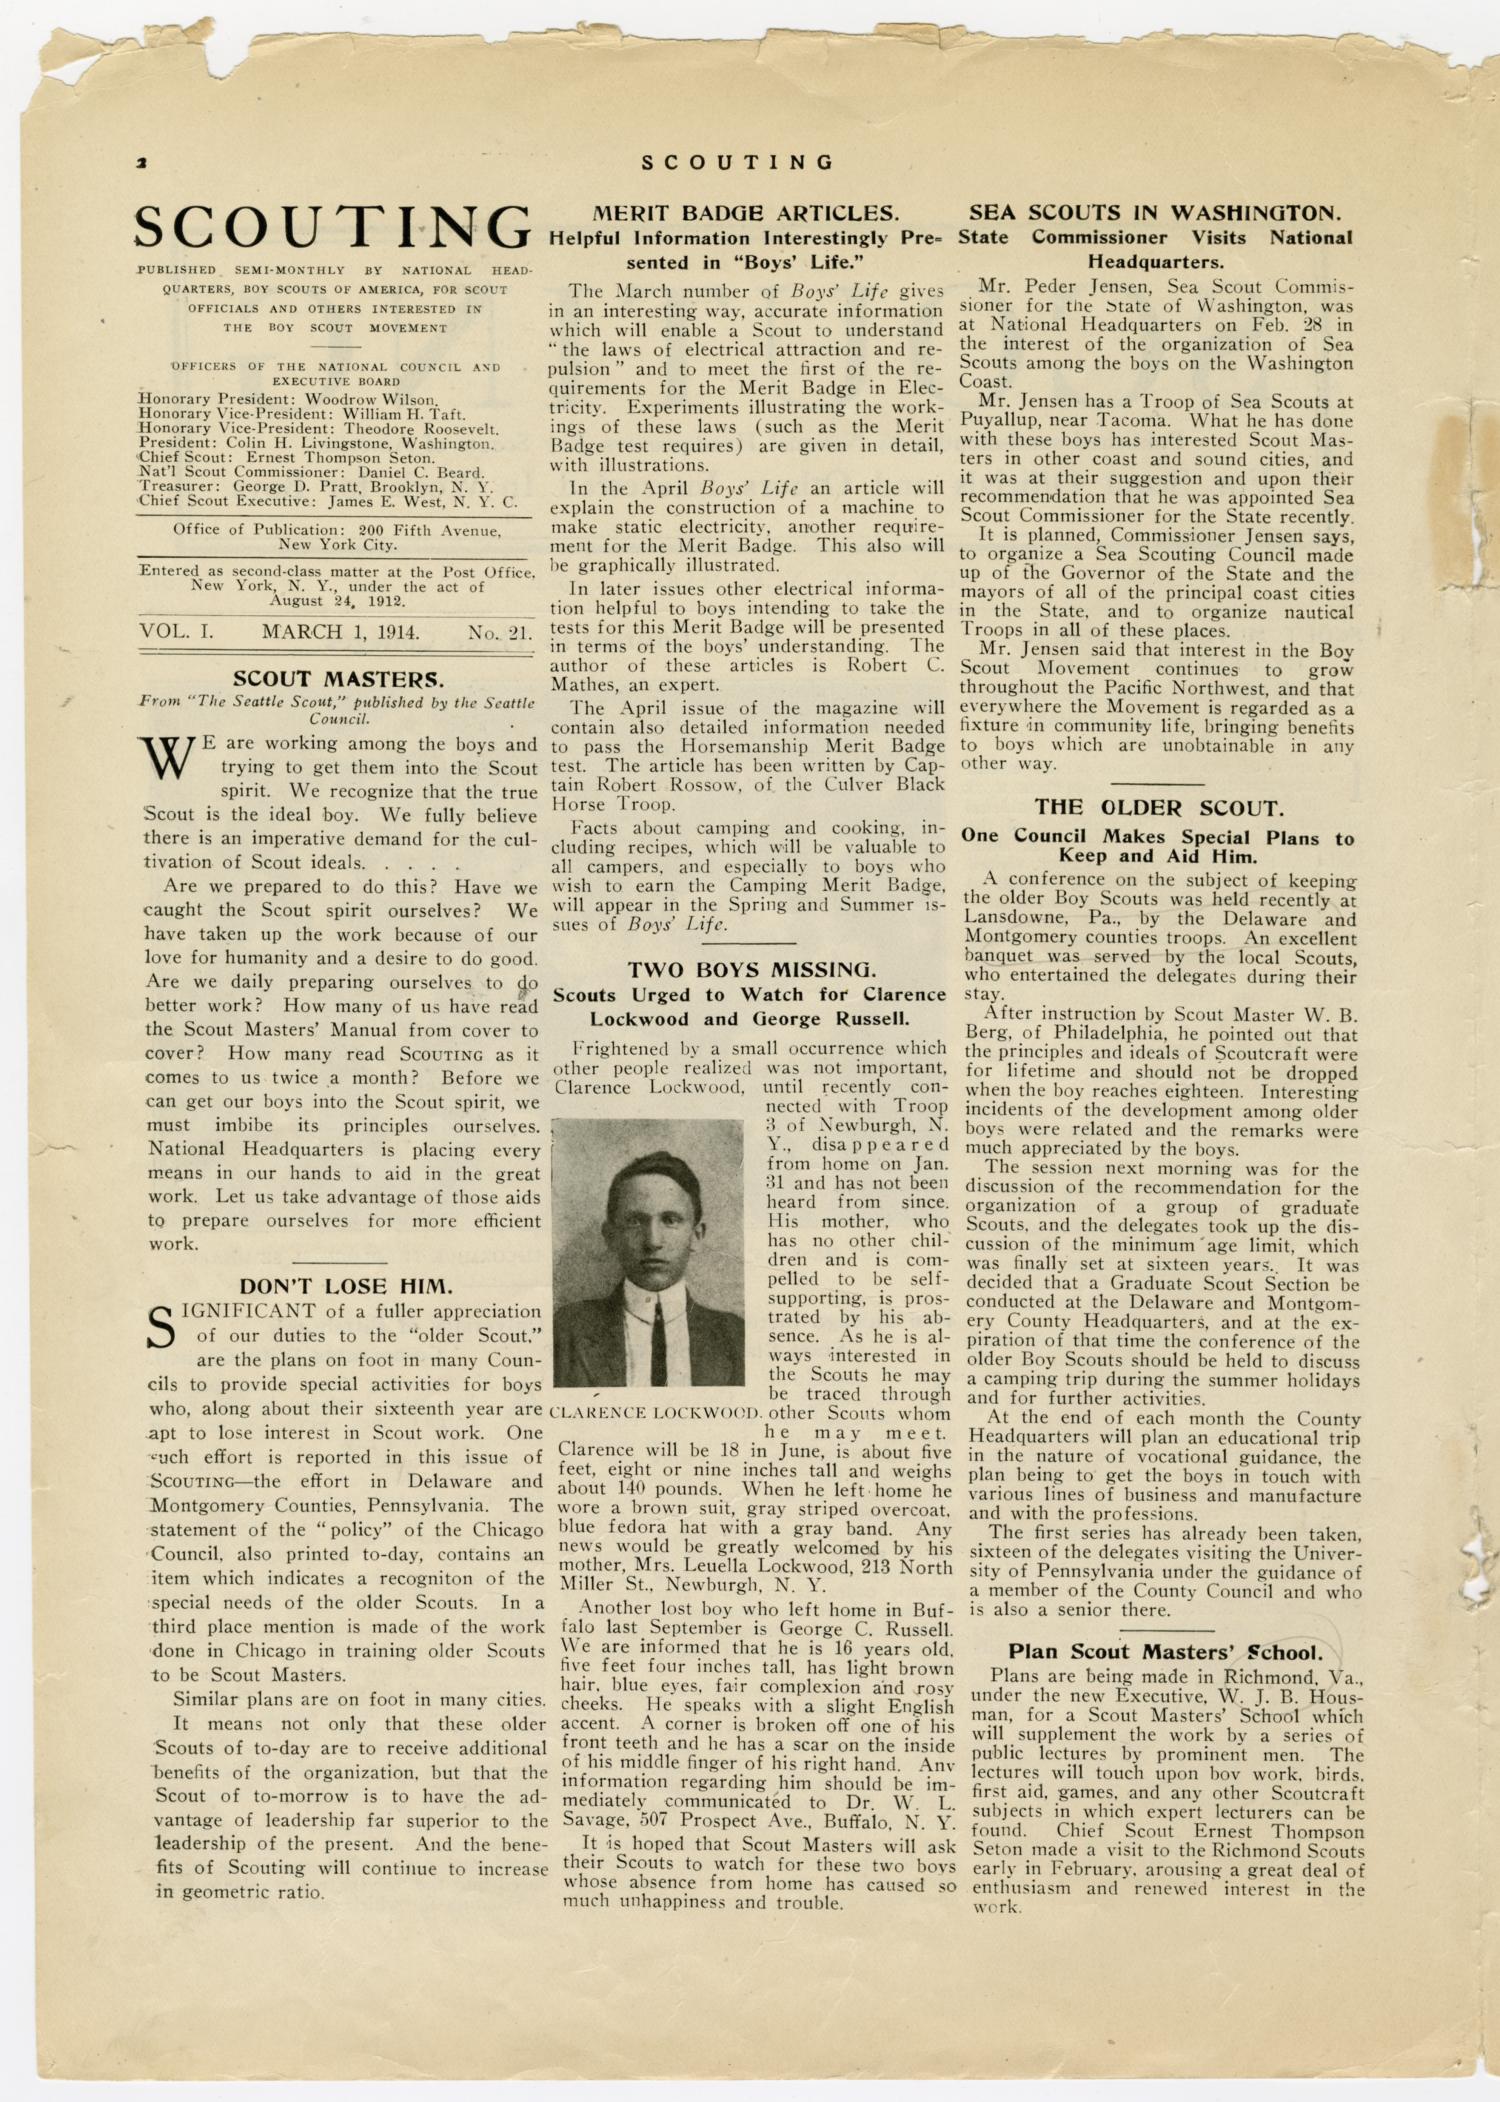 Scouting, Volume 1, Number 21, March 1, 1914
                                                
                                                    2
                                                